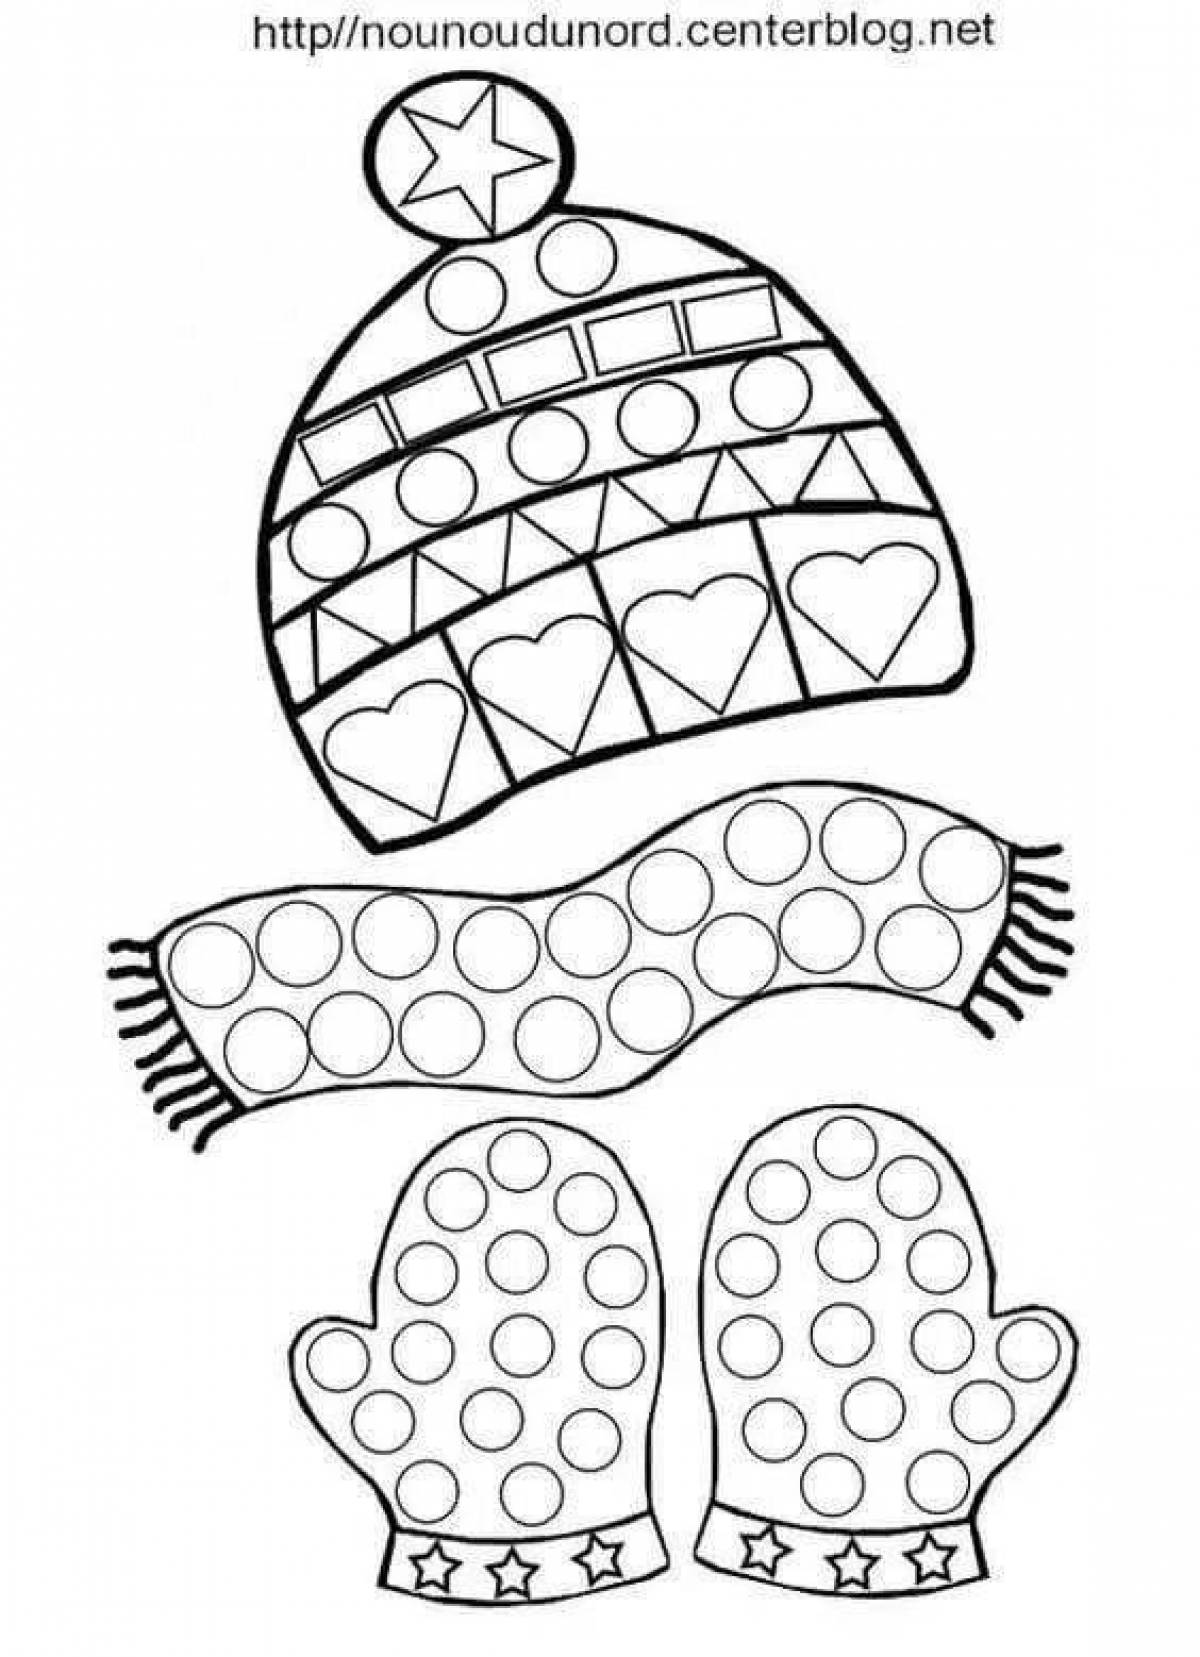 Great hat coloring book for 2-3 year olds